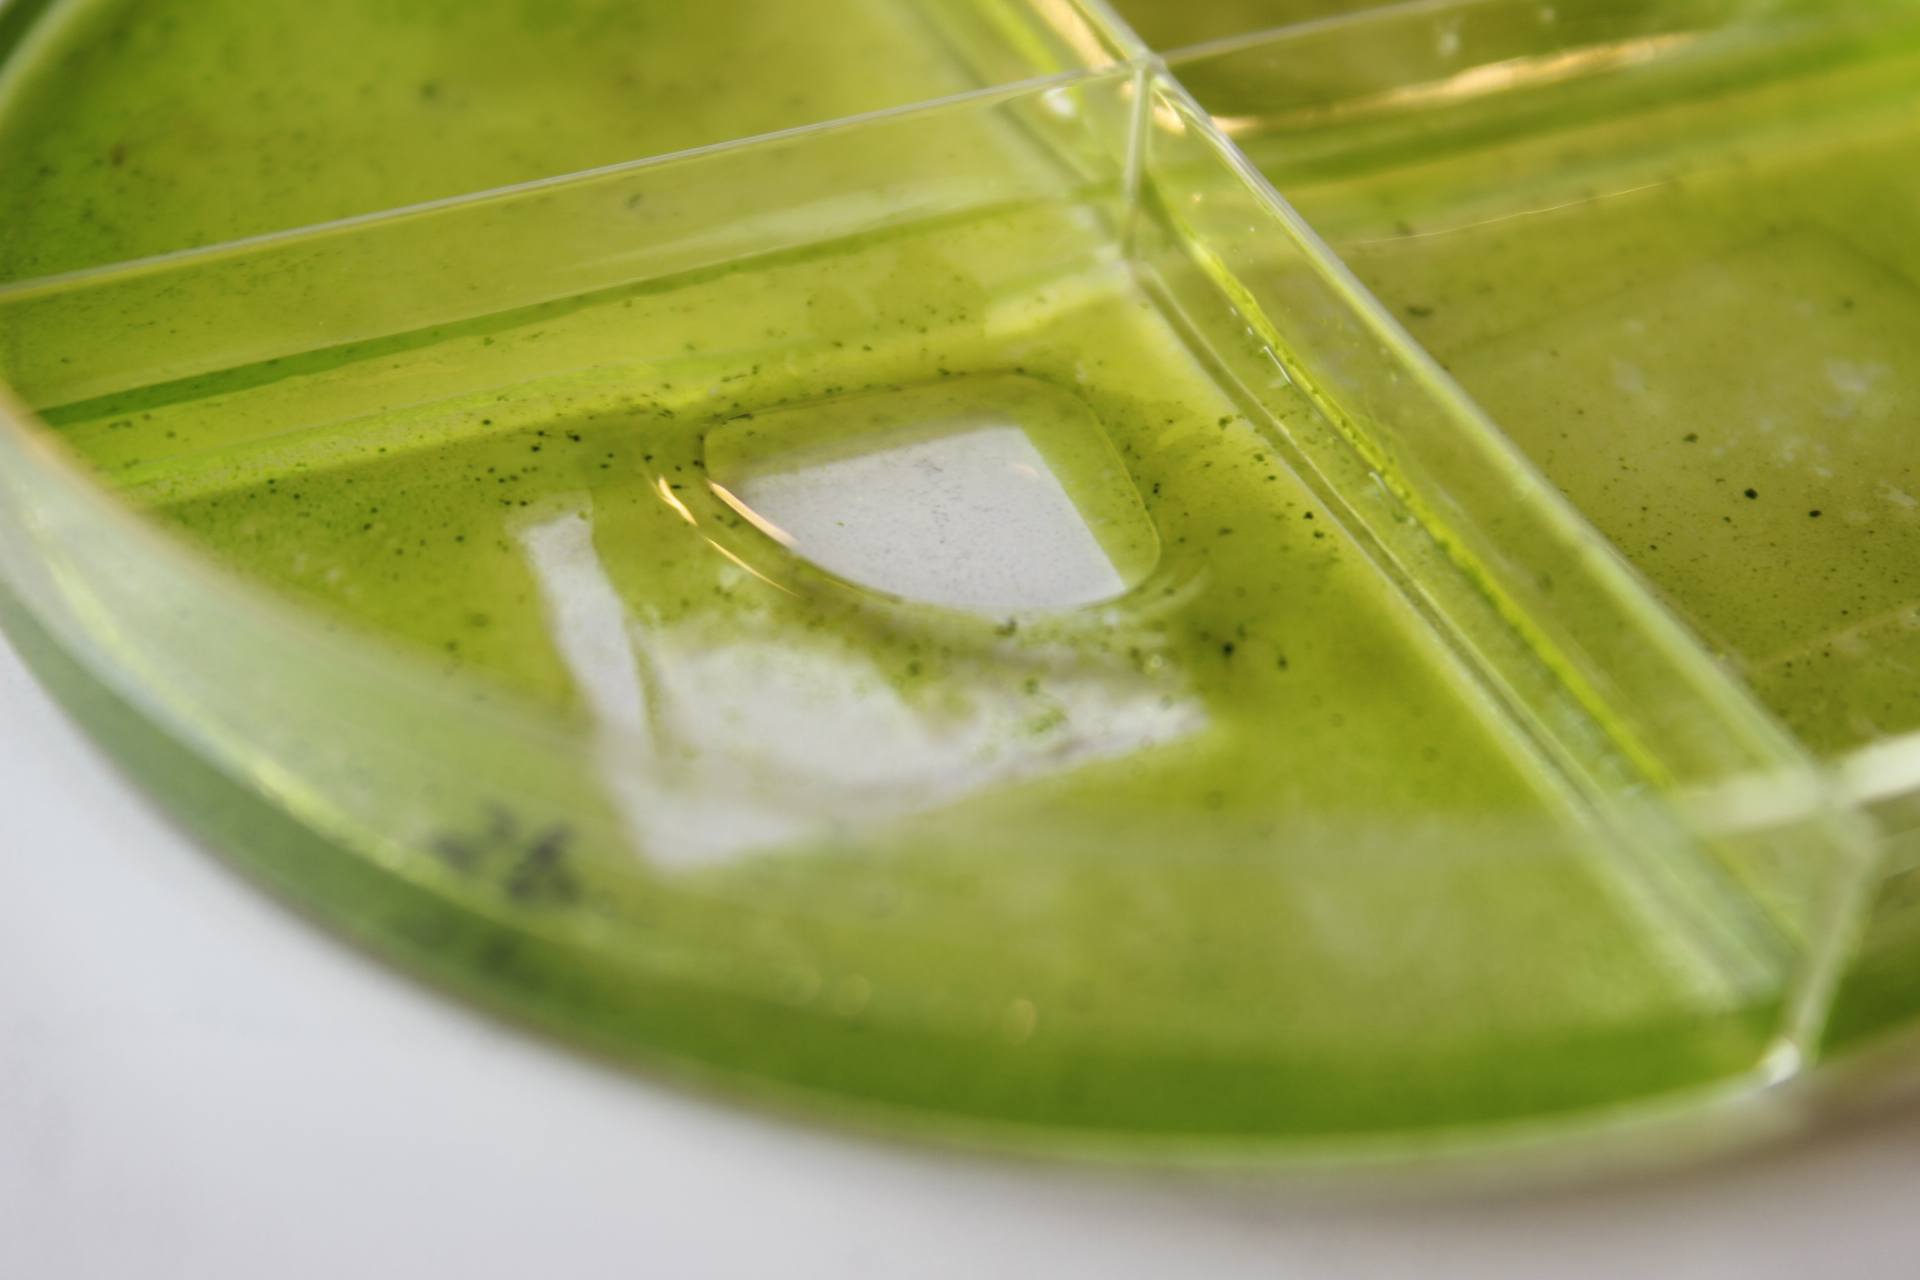 Infused PDMS in an algae dish